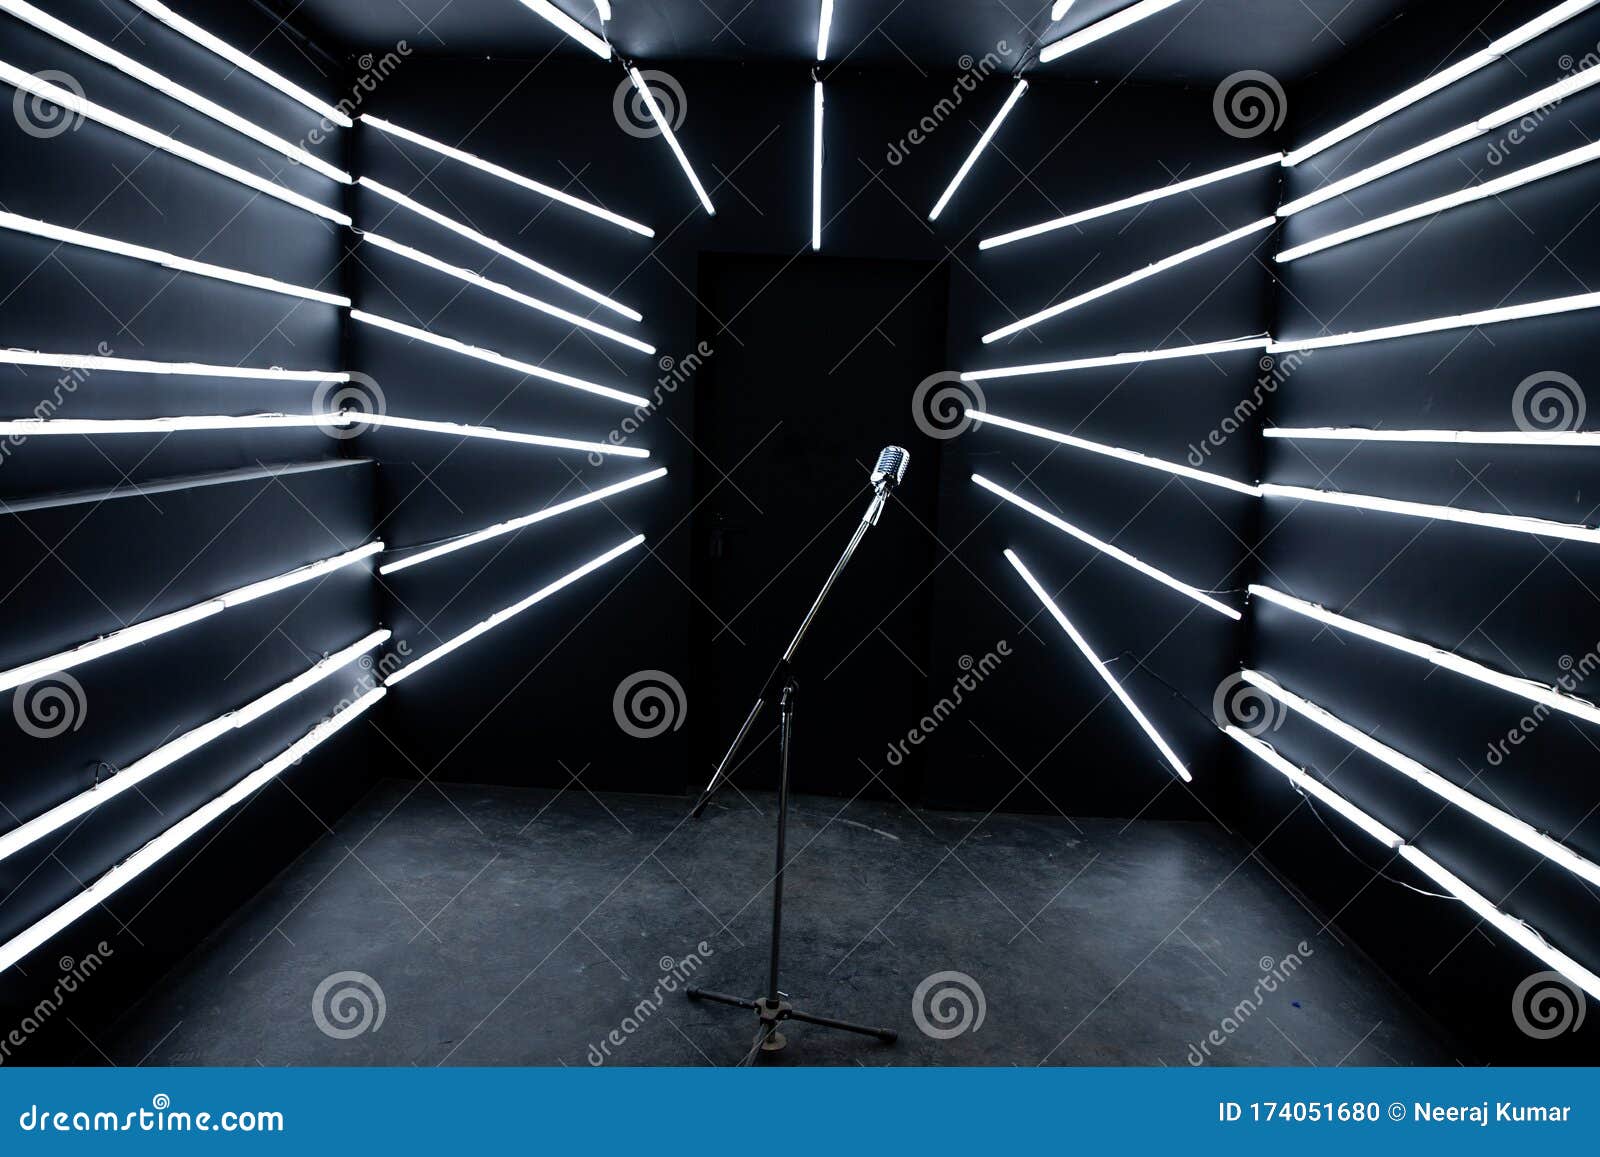 center positioned microphone with stand in music studio with black walls and lights at background full view 3d